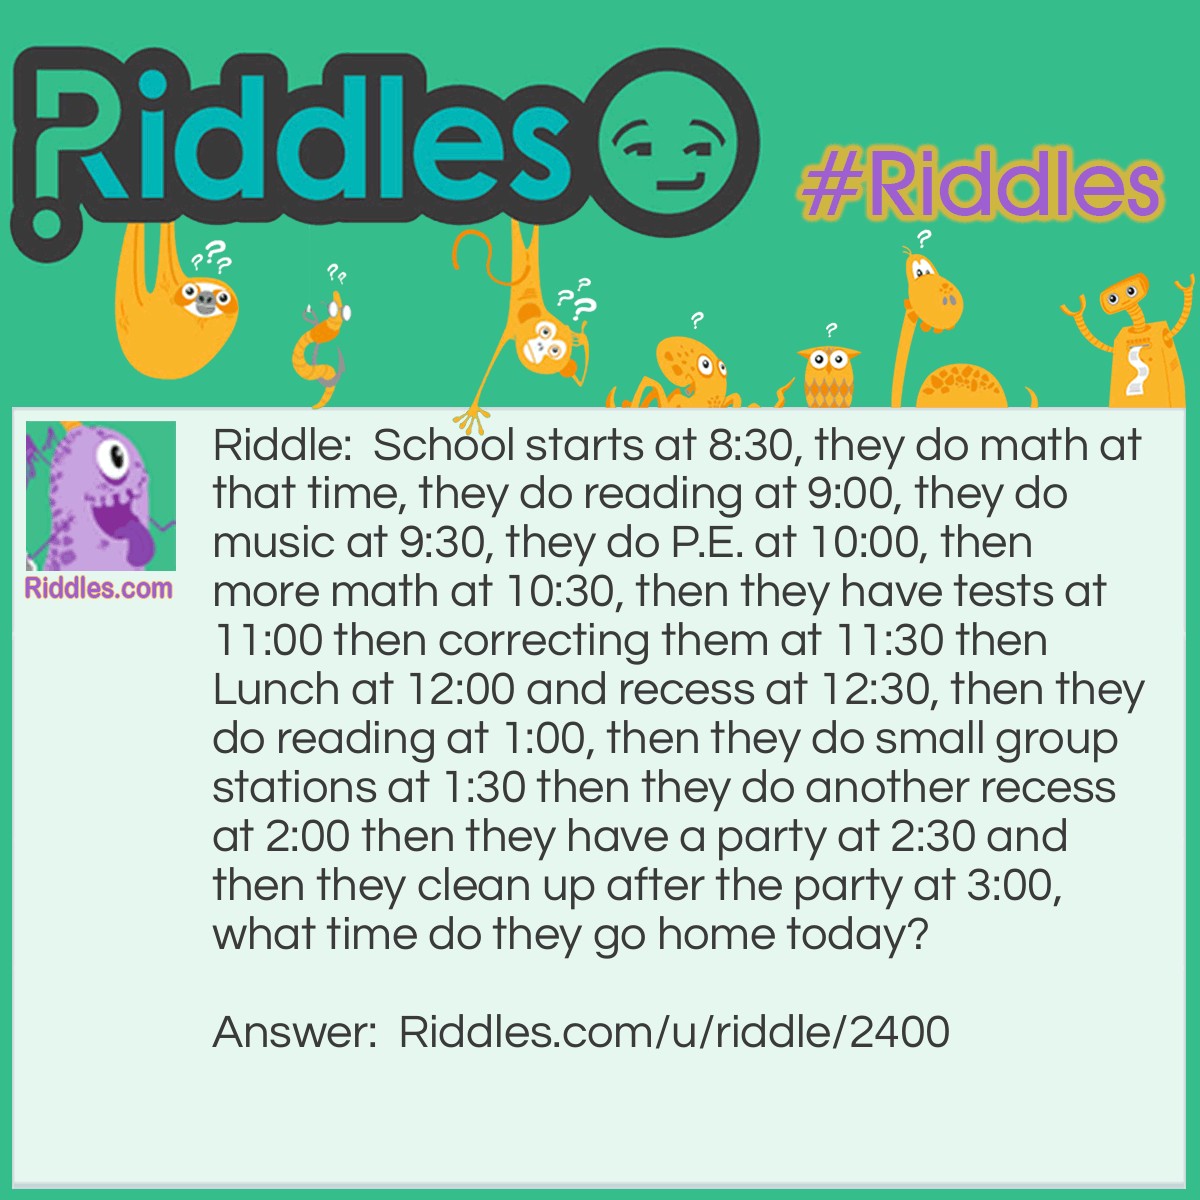 Riddle: School starts at 8:30, they do math at that time, they do reading at 9:00, they do music at 9:30, they do P.E. at 10:00, then more math at 10:30, then they have tests at 11:00 then correcting them at 11:30 then Lunch at 12:00 and recess at 12:30, then they do reading at 1:00, then they do small group stations at 1:30 then they do another recess at 2:00 then they have a party at 2:30 and then they clean up after the party at 3:00, what time do they go home today? Answer: 3:30 because each activity is 30 minutes so they clean up for 30 minutes then leave at 3:30!